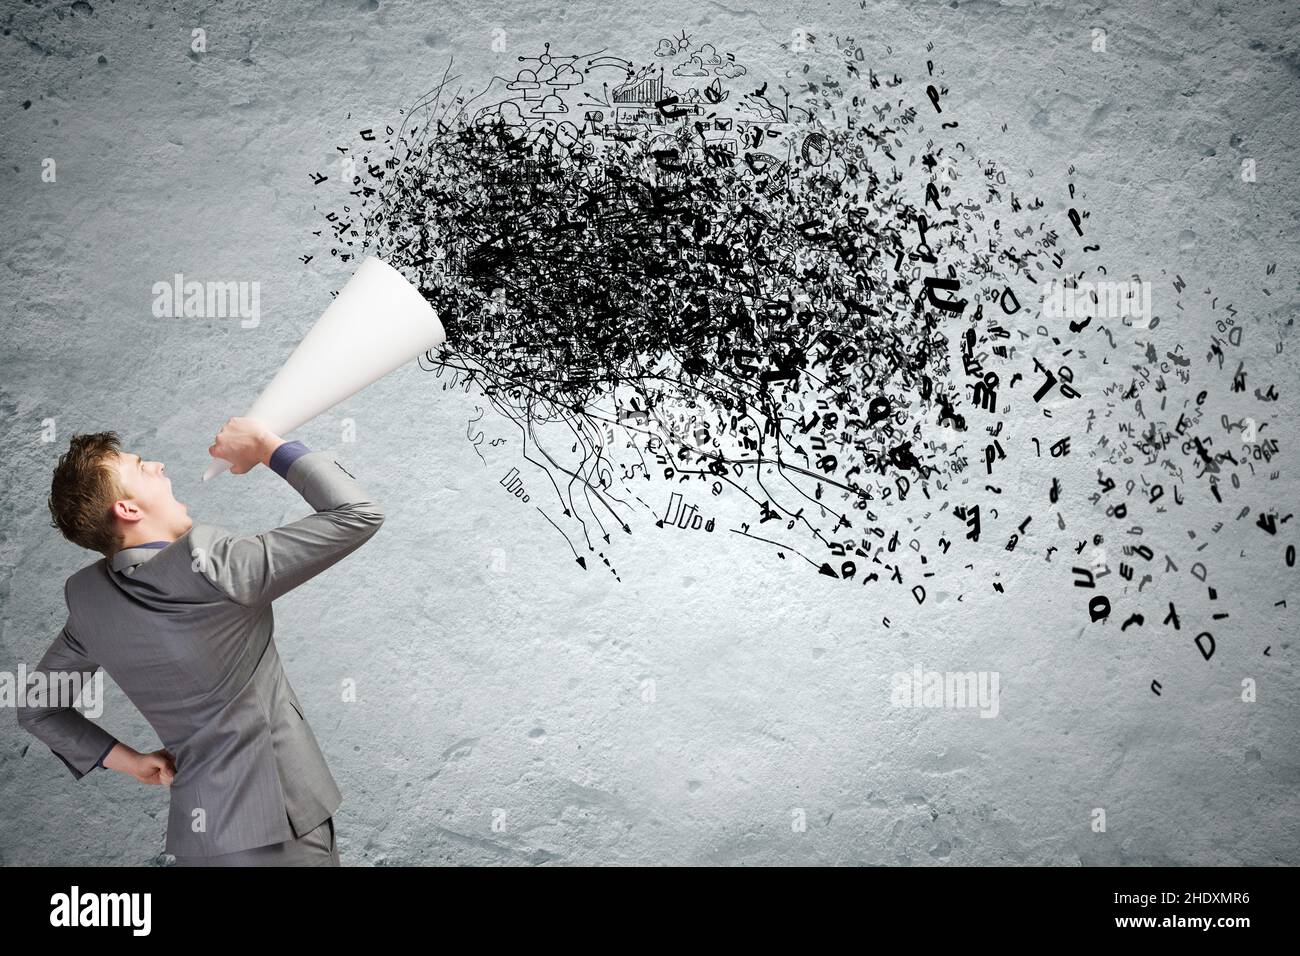 chaos, shouting, advertising, announce, chaotic, disorder, mess, scream, screaming, shout, announces Stock Photo